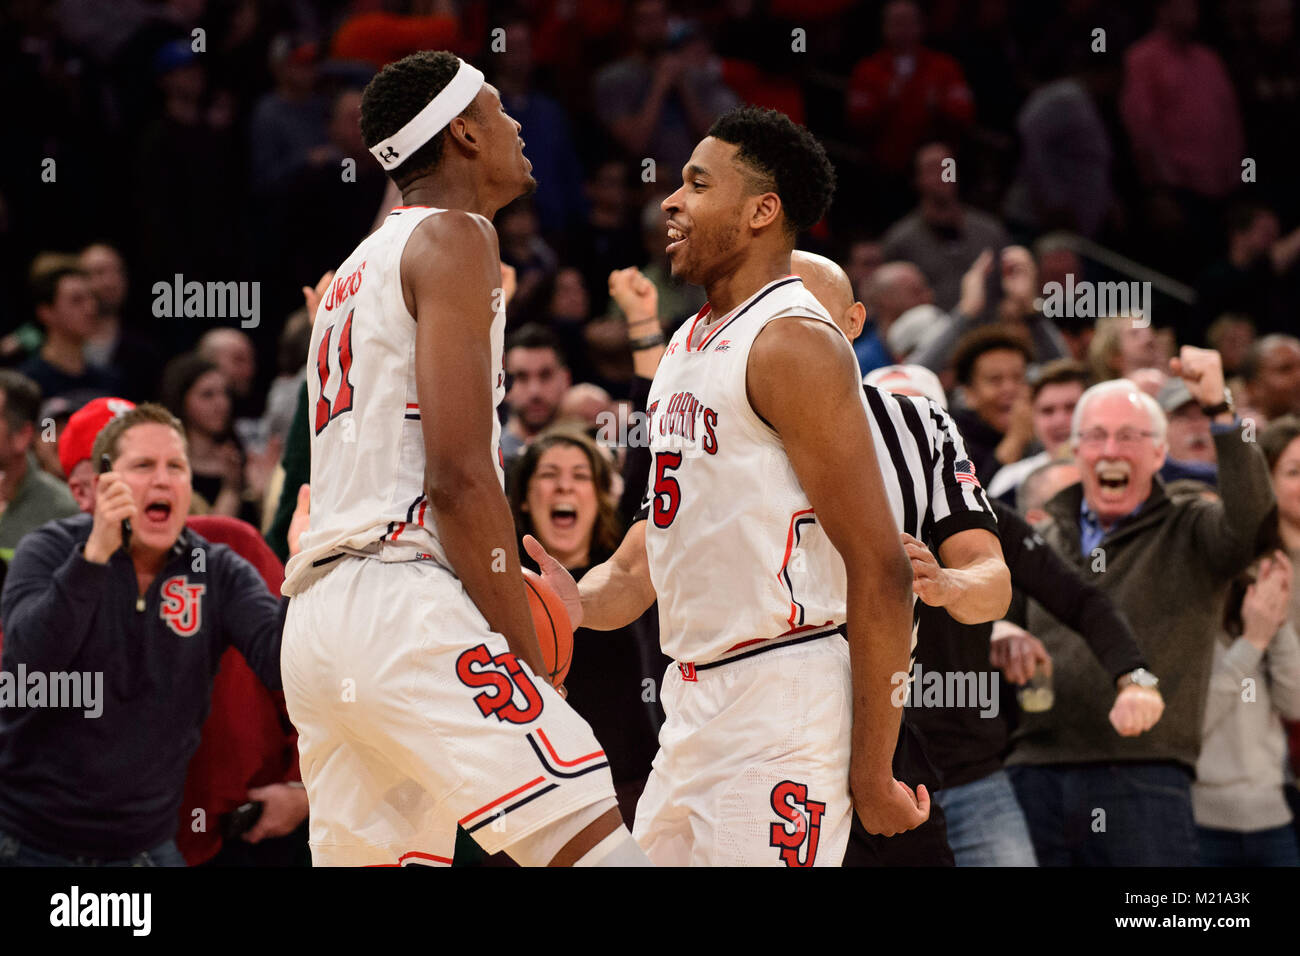 February 03, 2018: St. John's Red Storm guard Justin Simon (5) and St. John's Red Storm forward Tariq Owens (11) celebrate after the game between The Duke Blue Devils and St. John's Red Storm at Madison Square Garden, New York, New York. The St. John's Red Storm upset The Duke Blue Devils 81-77. Mandatory credit: Kostas Lymperopoulos/CSM Stock Photo